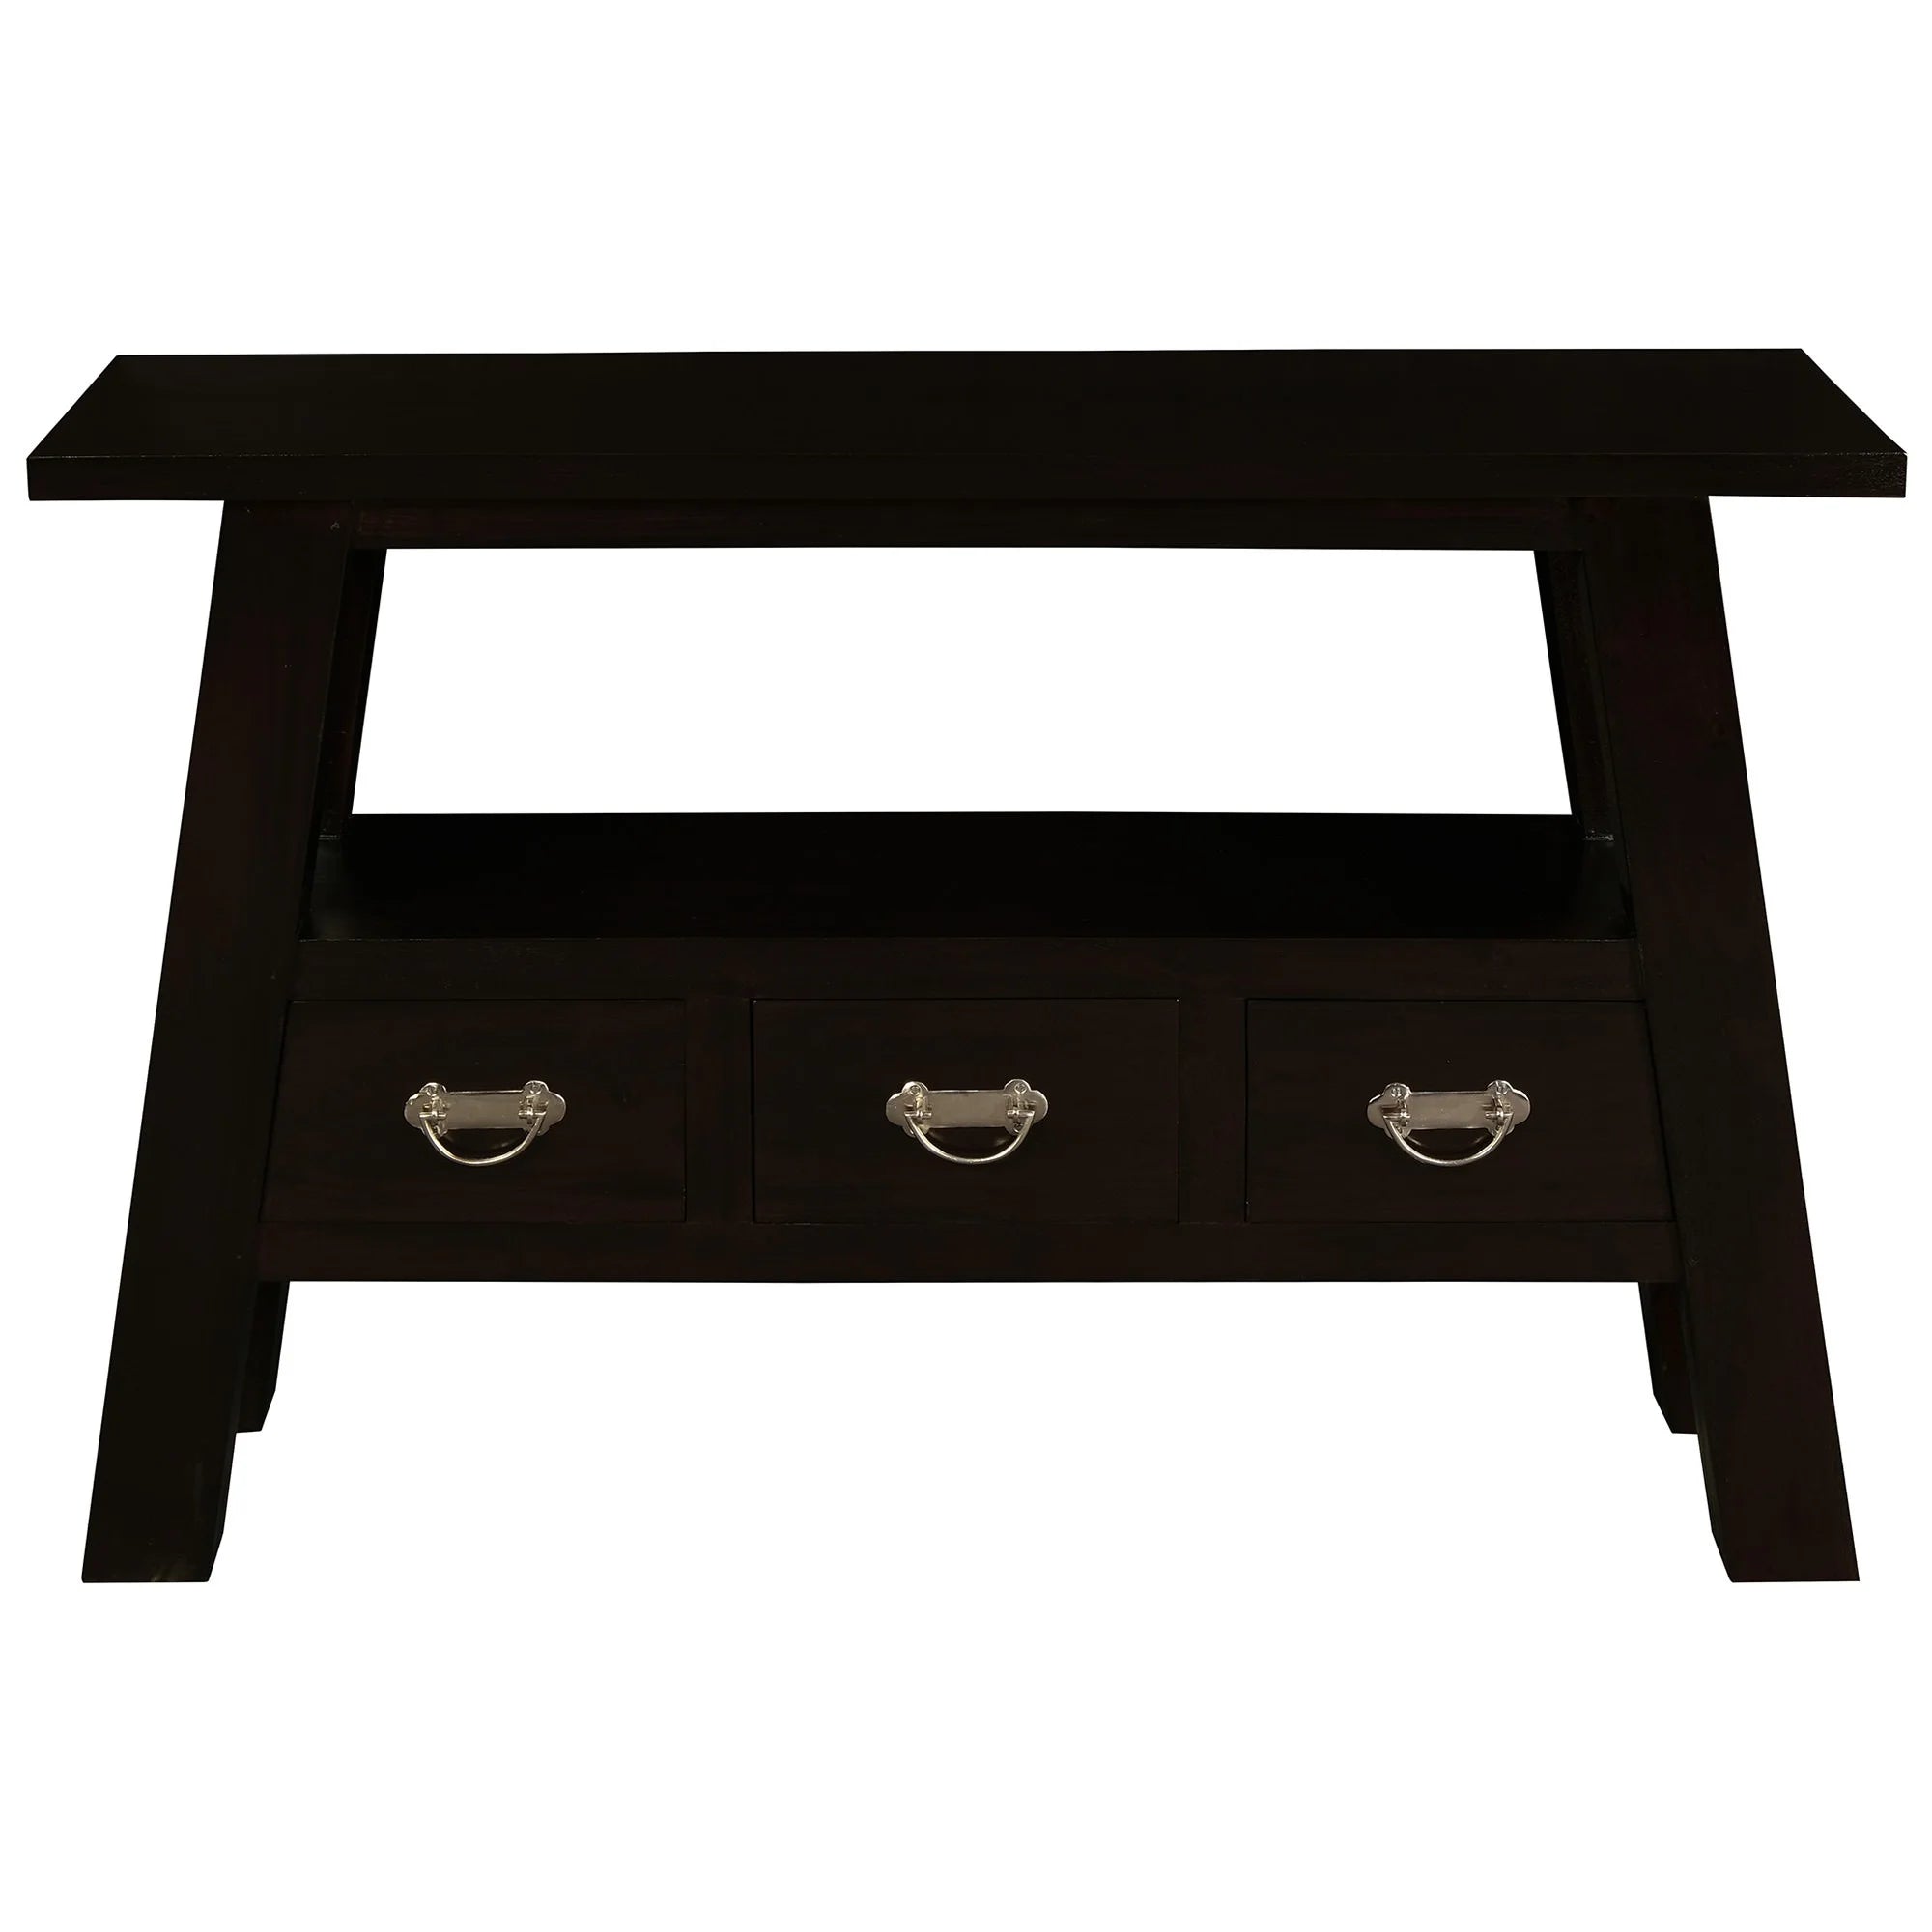 Zimra Timber 3 Drawer Console Table - Chocolate - Notbrand